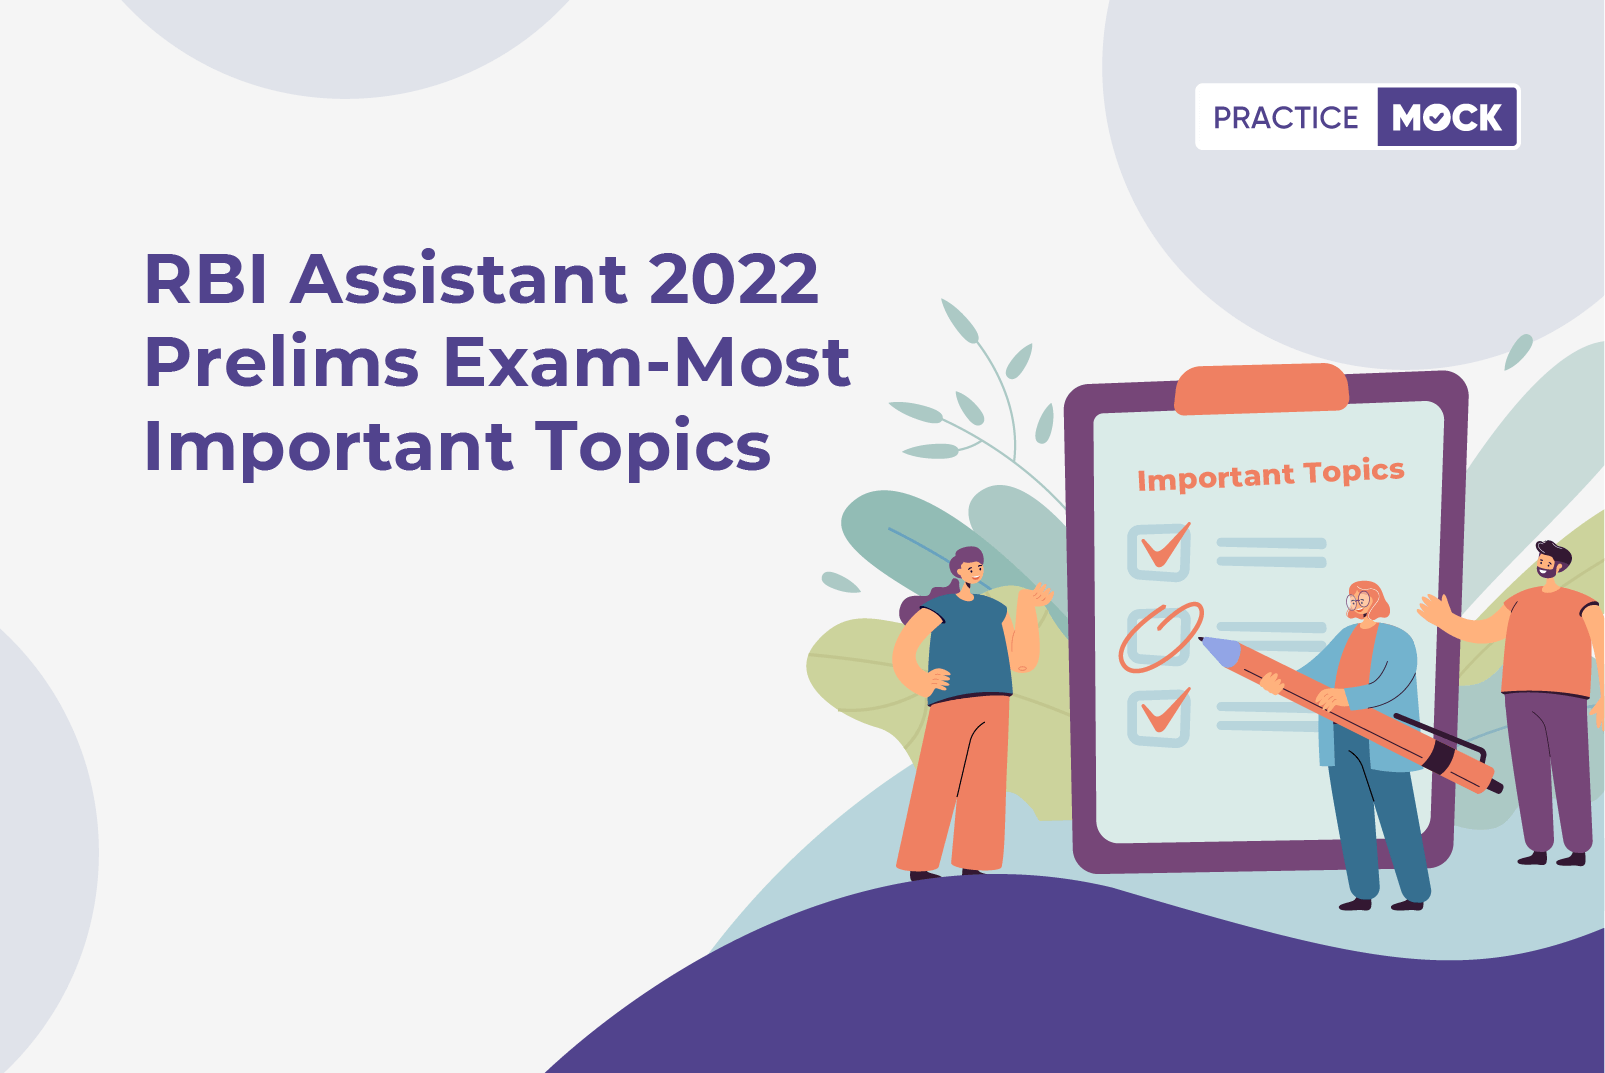 RBI Assistant 2022 Prelims Exam-Most Expected Topics